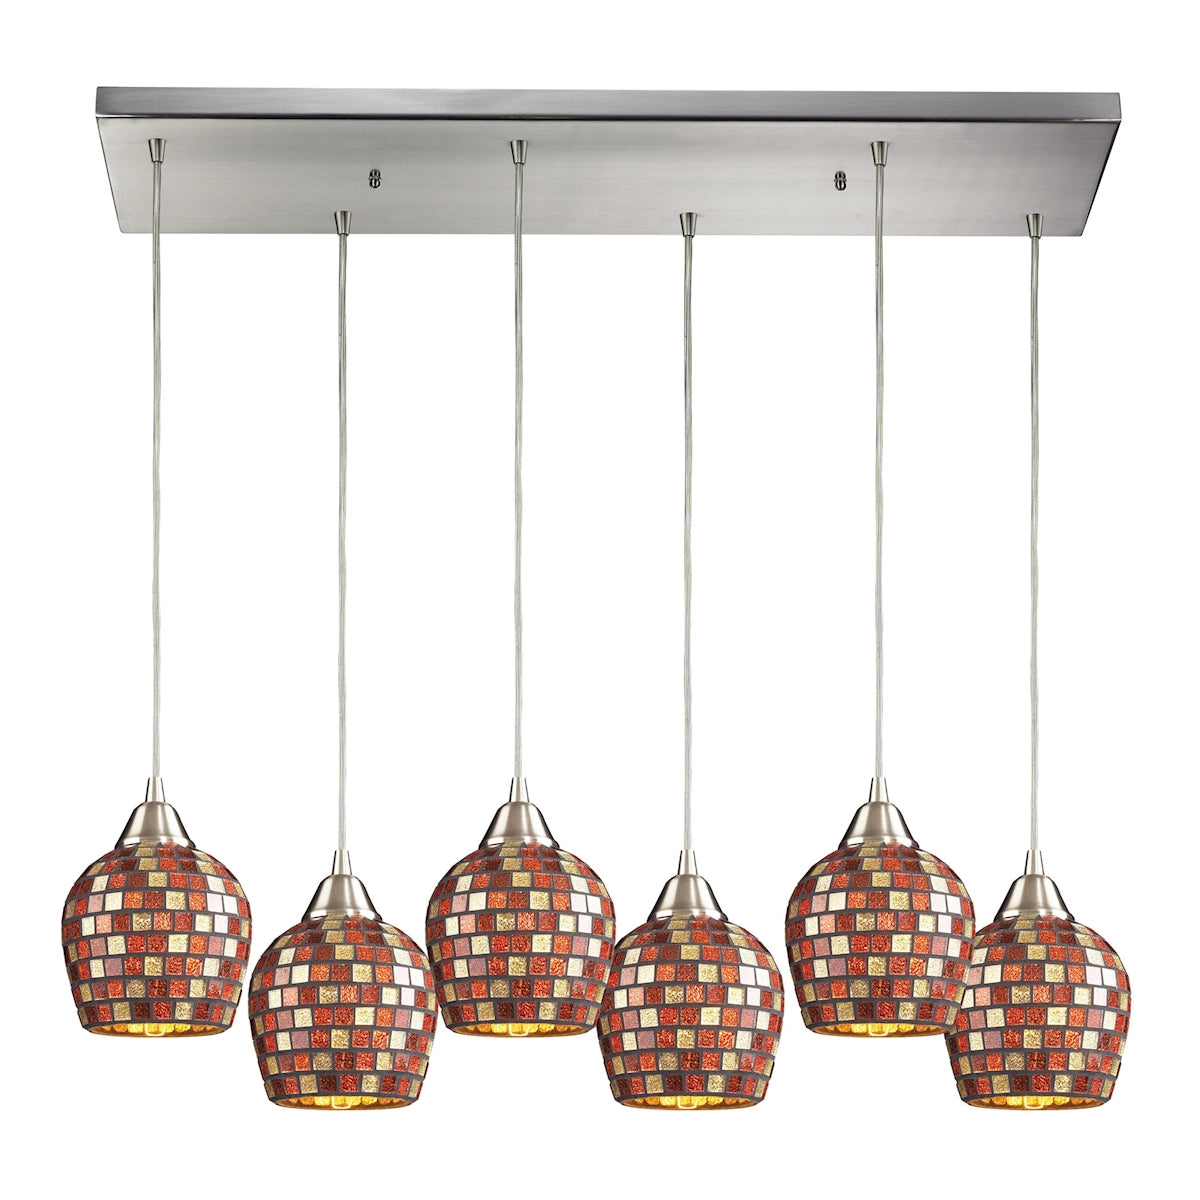 ELK Lighting 528-6RC-MLT Fusion 6-Light Rectangular Pendant Fixture in Satin Nickel with Multi-colored Mosaic Glass